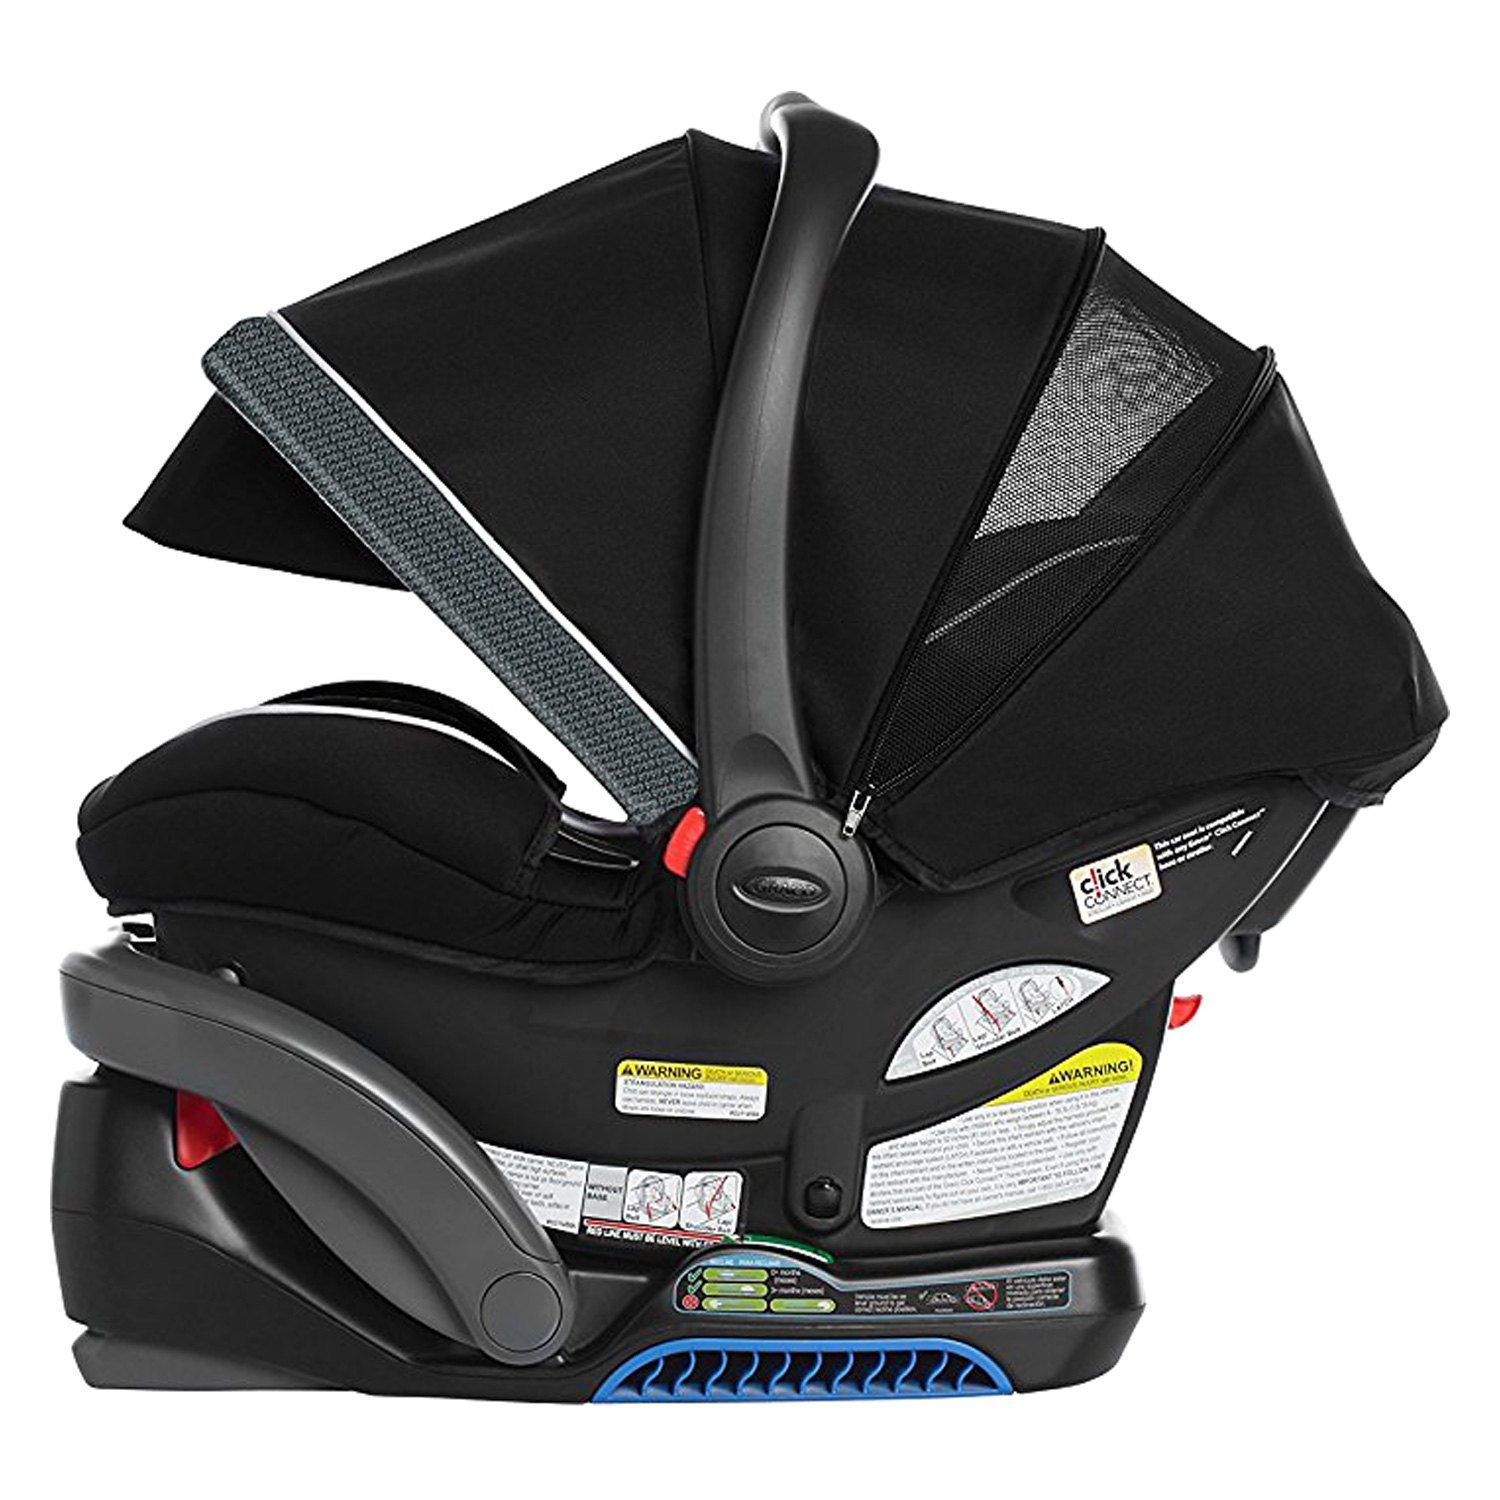 graco toddler car seat instructions